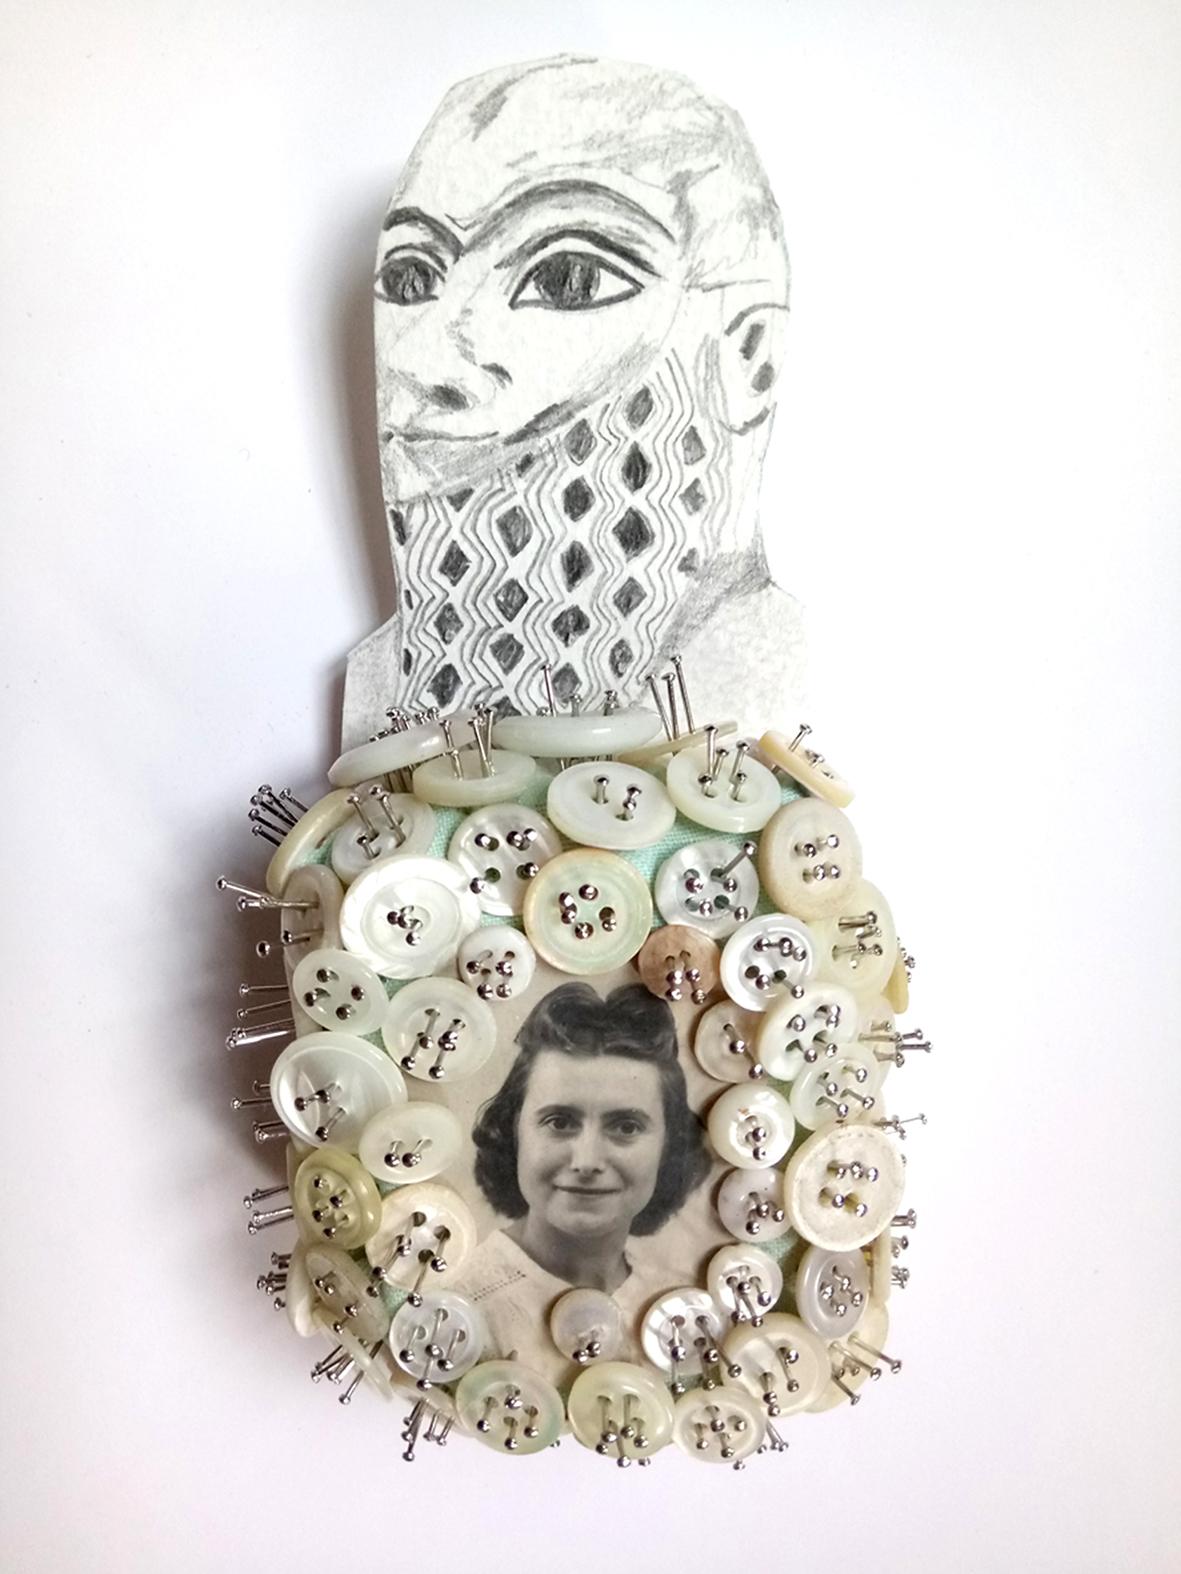 Portraits et boutons (portraits and buttons) - Mixed Media Art by Severine Gallardo